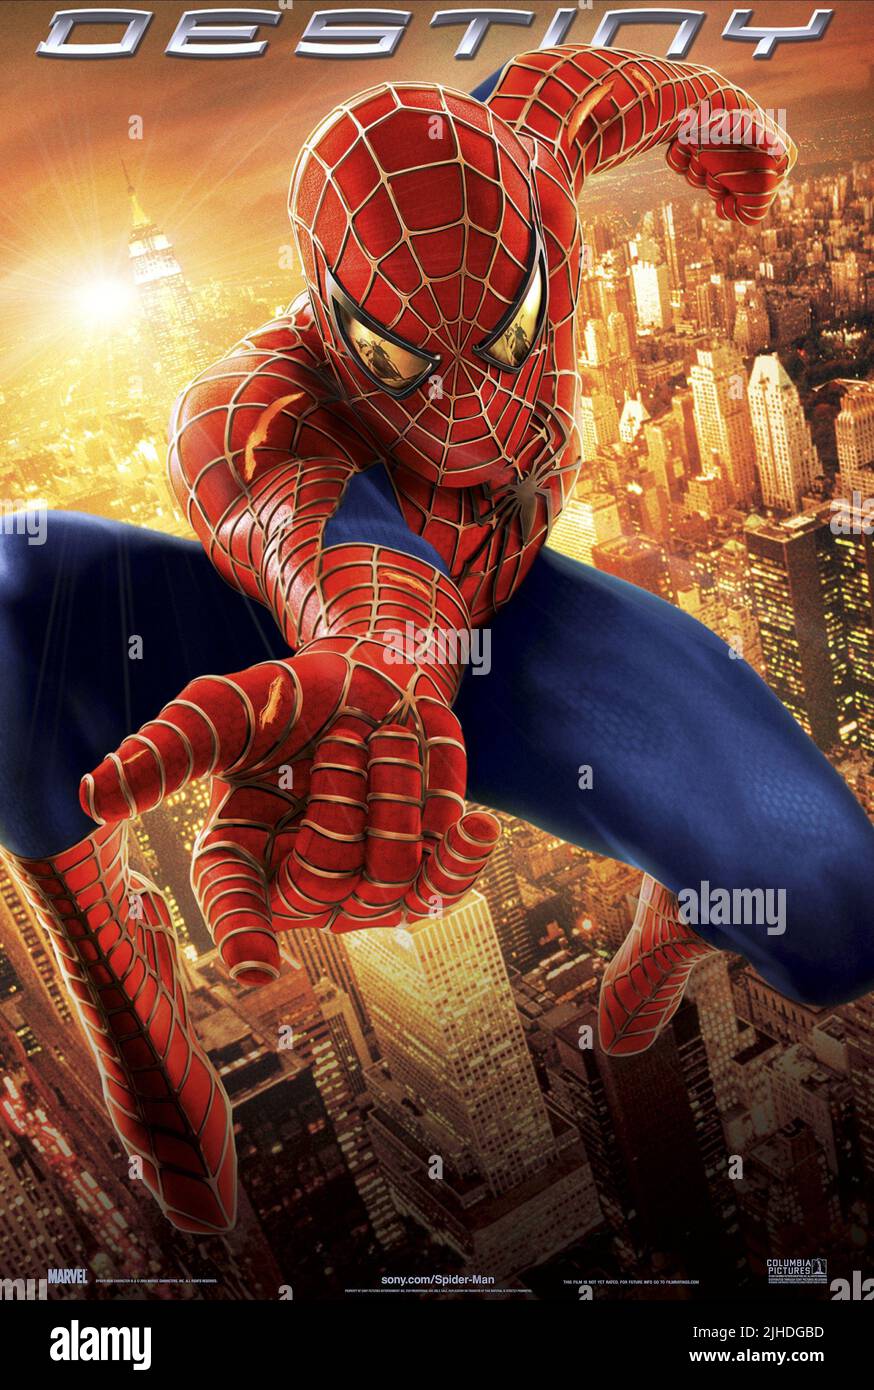 TOBEY MAGUIRE POSTER, SPIDER-MAN 2, 2004 Foto Stock